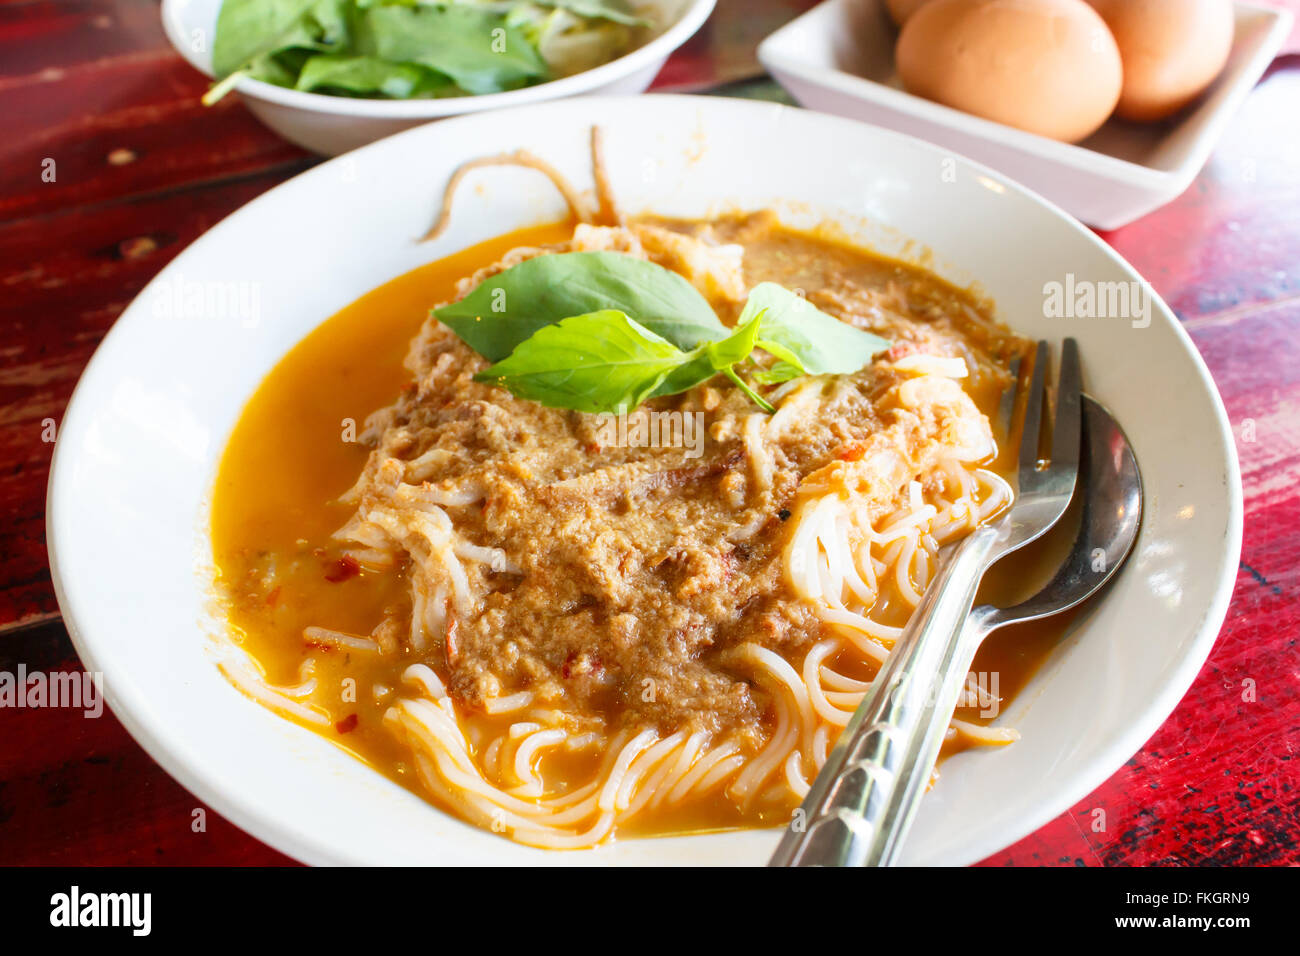 Kanom jeen namya (white noodles with fish curry sauce), thai food. Stock Photo